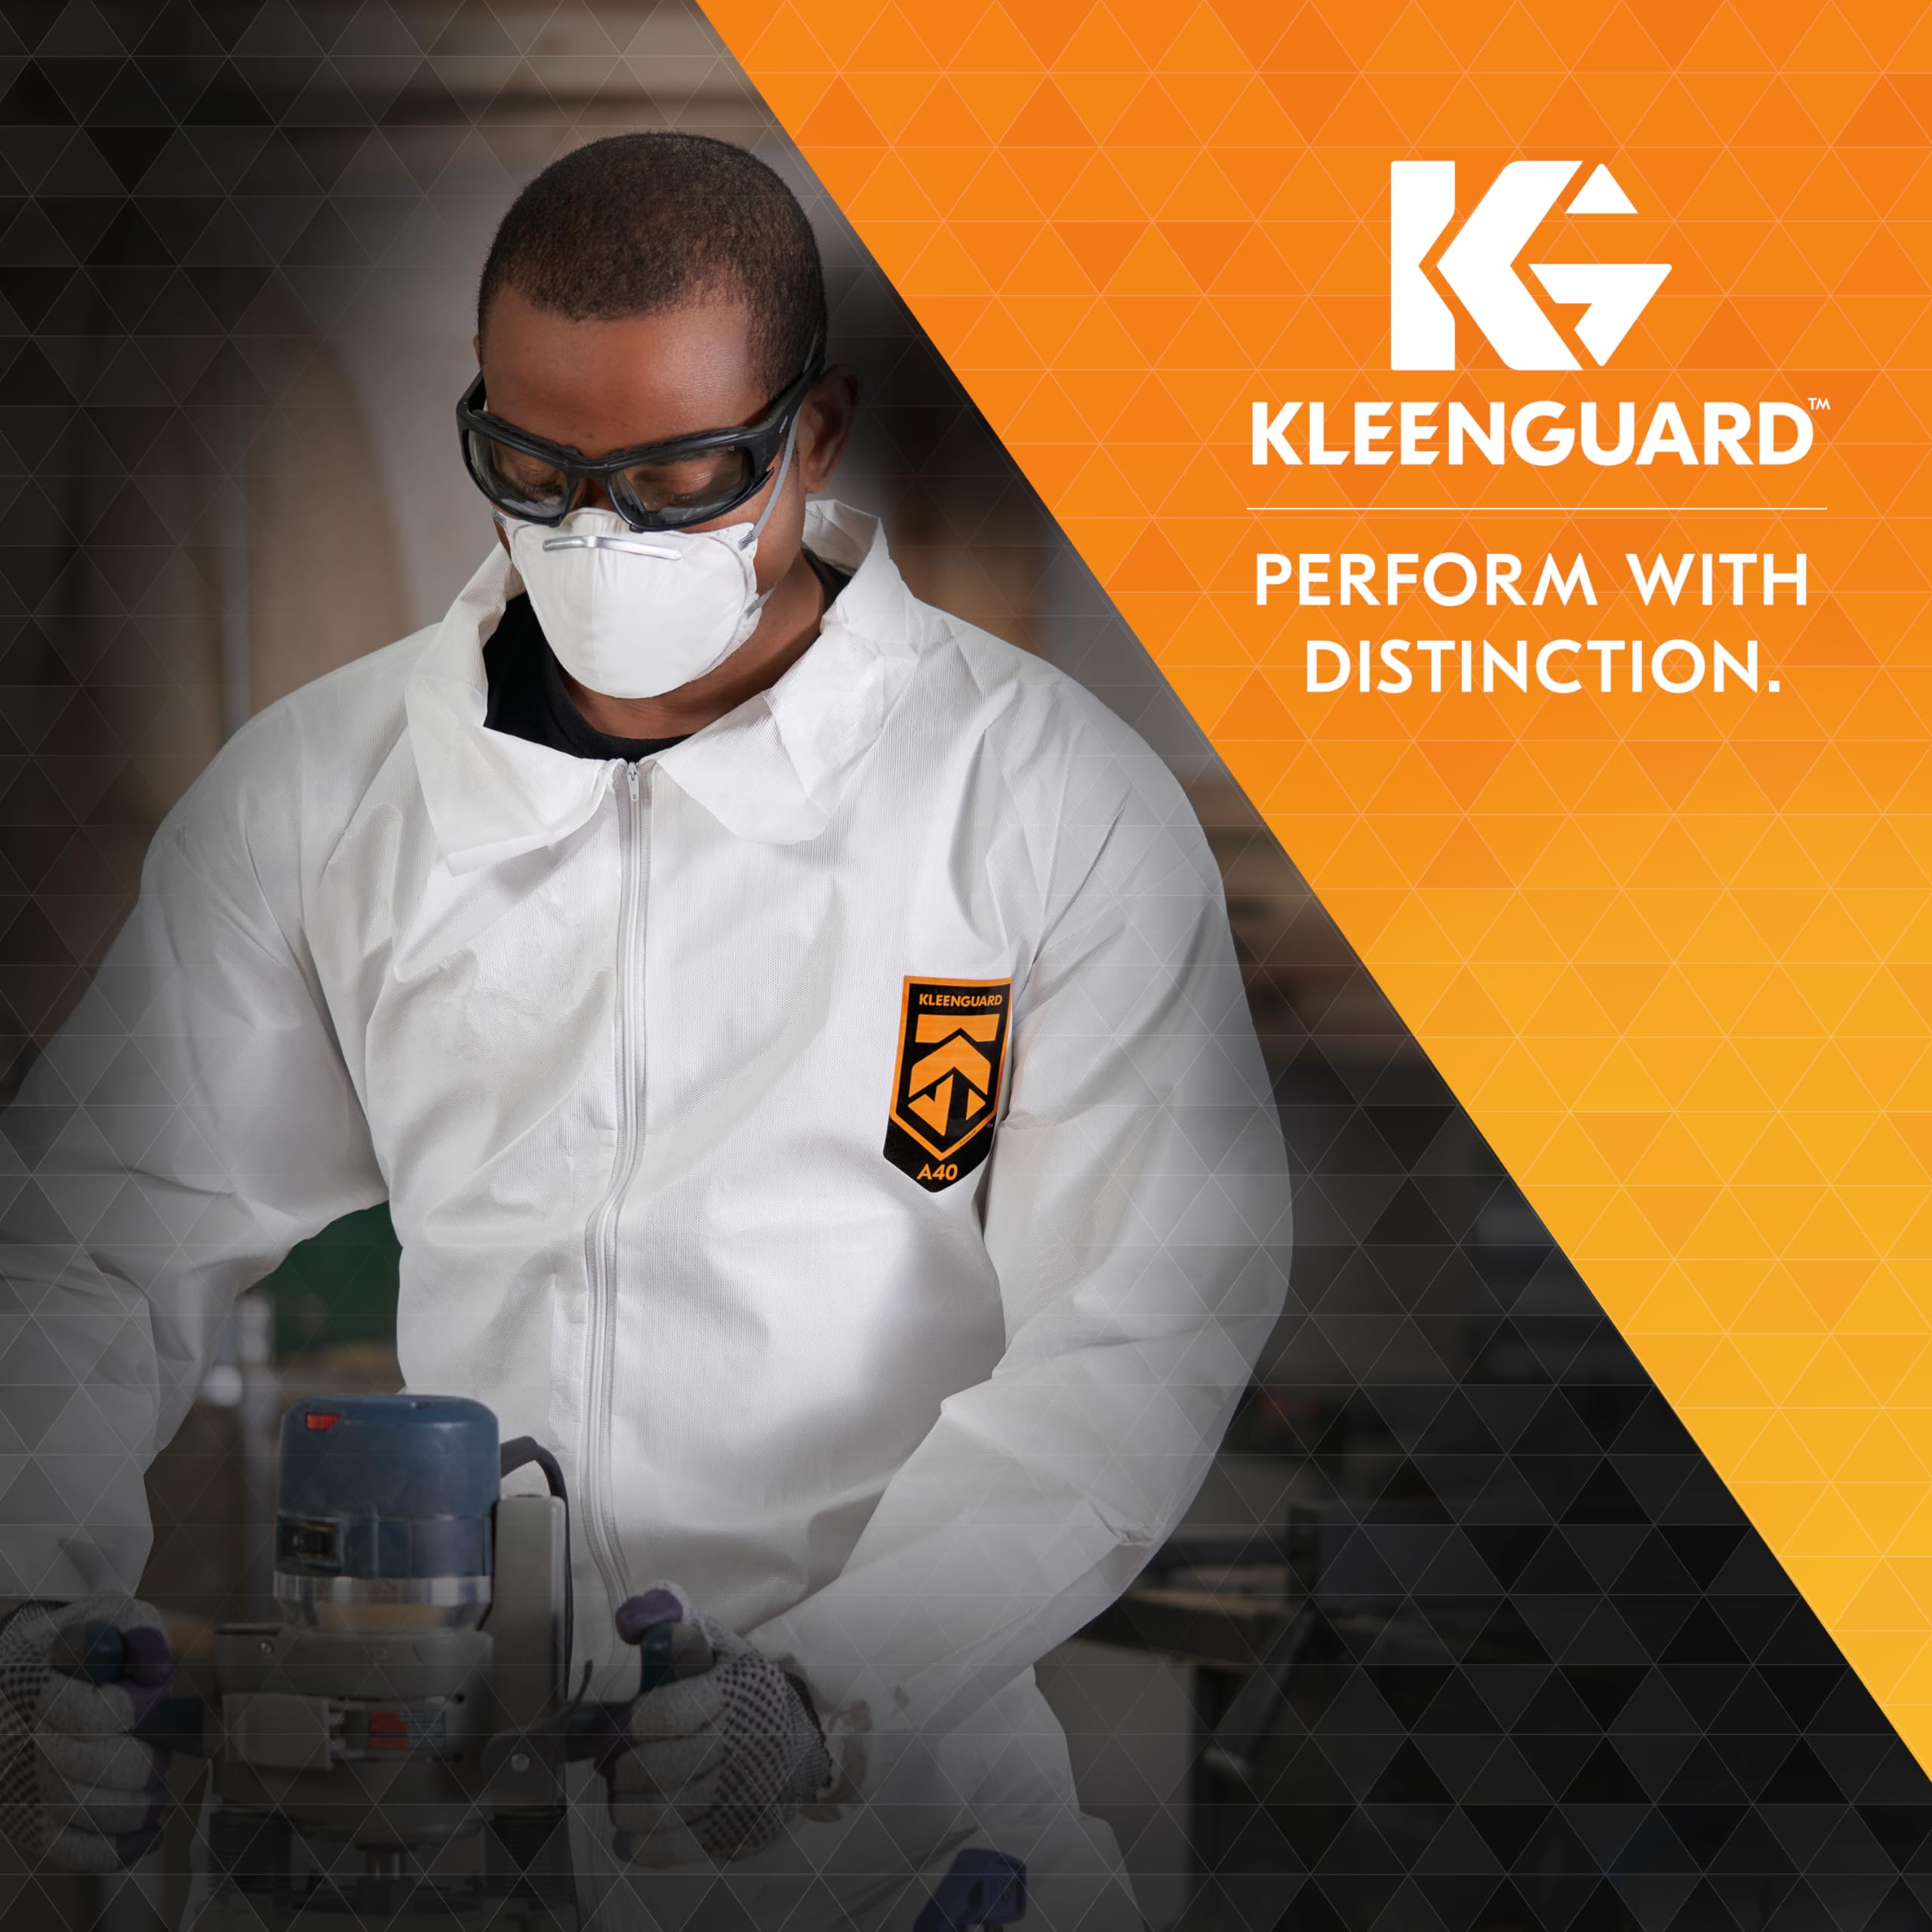 Kleenguard™ 3300 Series N95 Particulate Respirator (54625), RA3315 Molded Cup Style, NIOSH-Approved, Regular Fit, White (20 Respirators/Box)